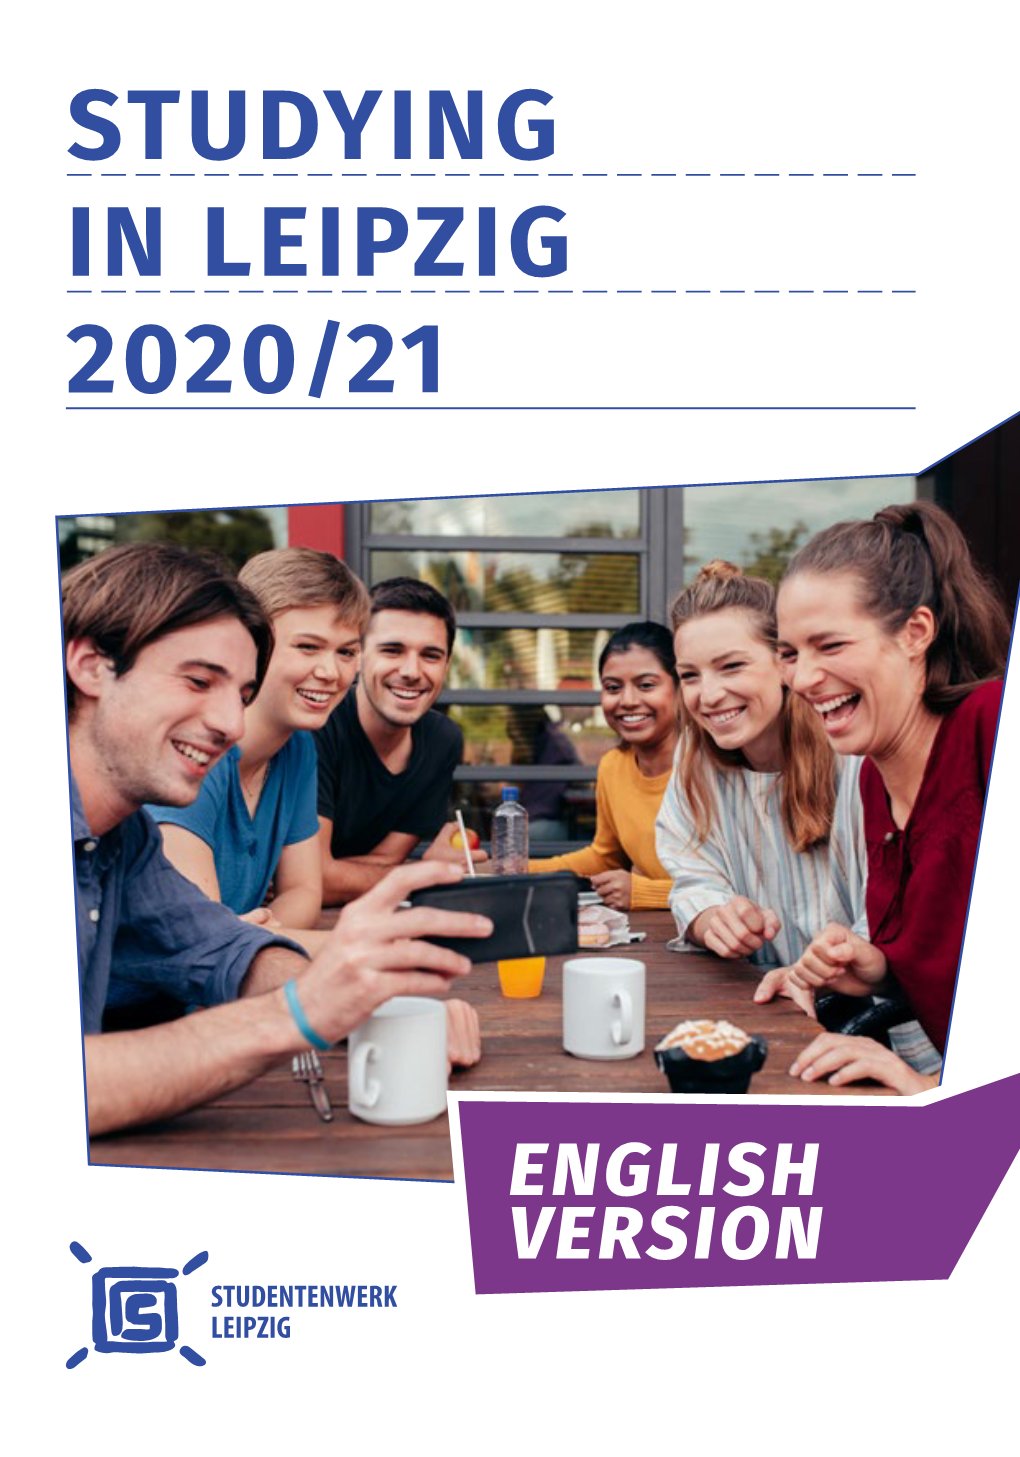 ORE THAN 2020/21 LEIPZIG in STUDYING EVER! Apply for Bafög!